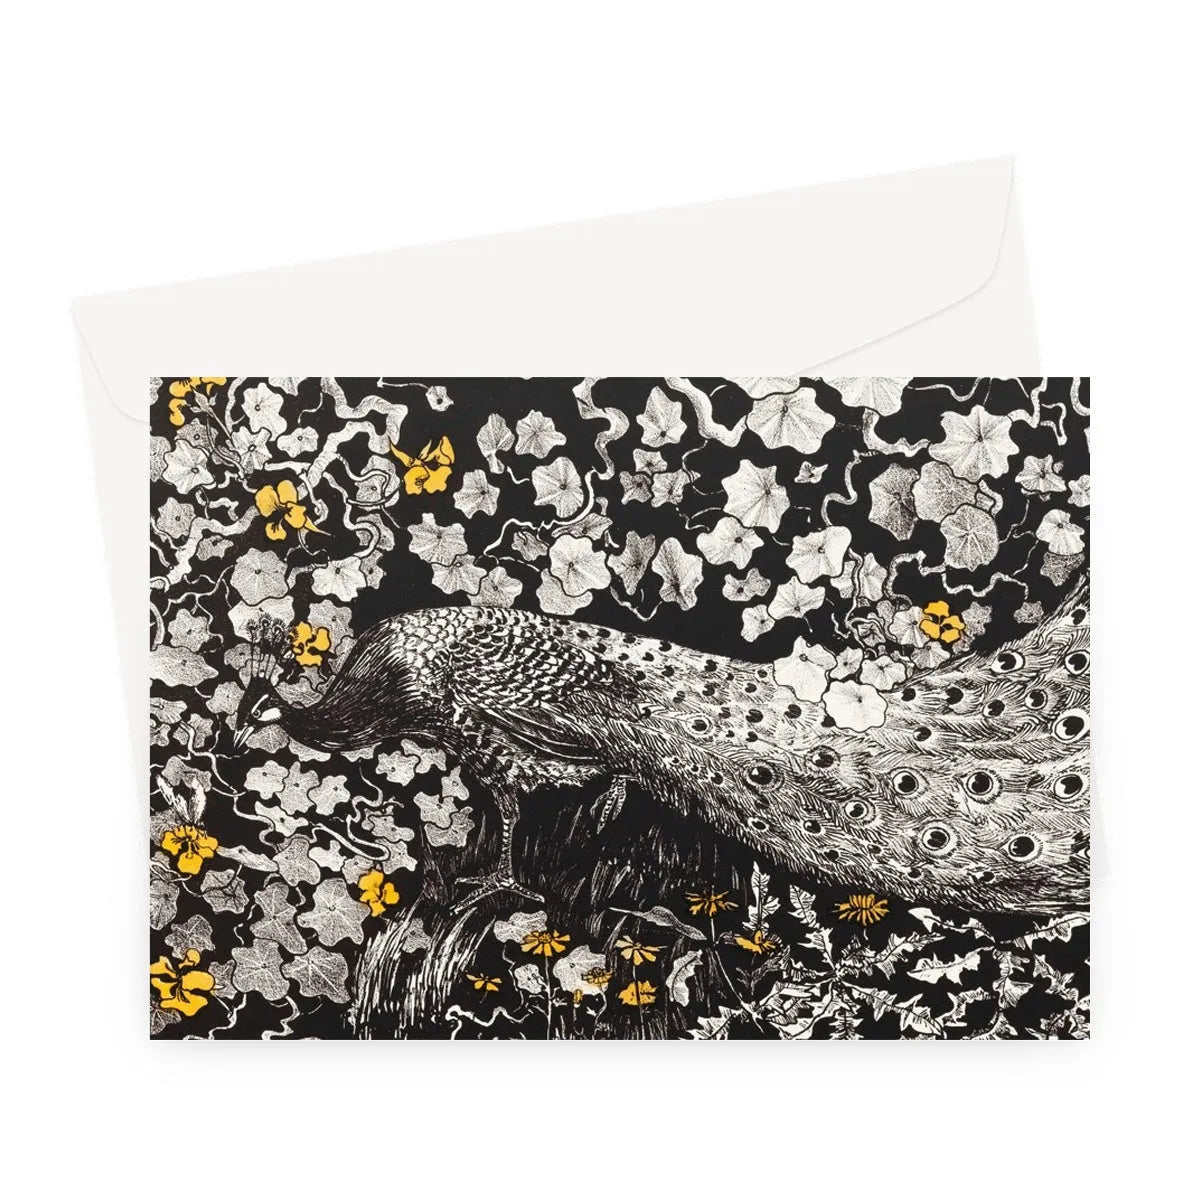 Peacock By Theo Van Hoytema Greeting Card - A5 Landscape / 1 Card - Notebooks & Notepads - Aesthetic Art